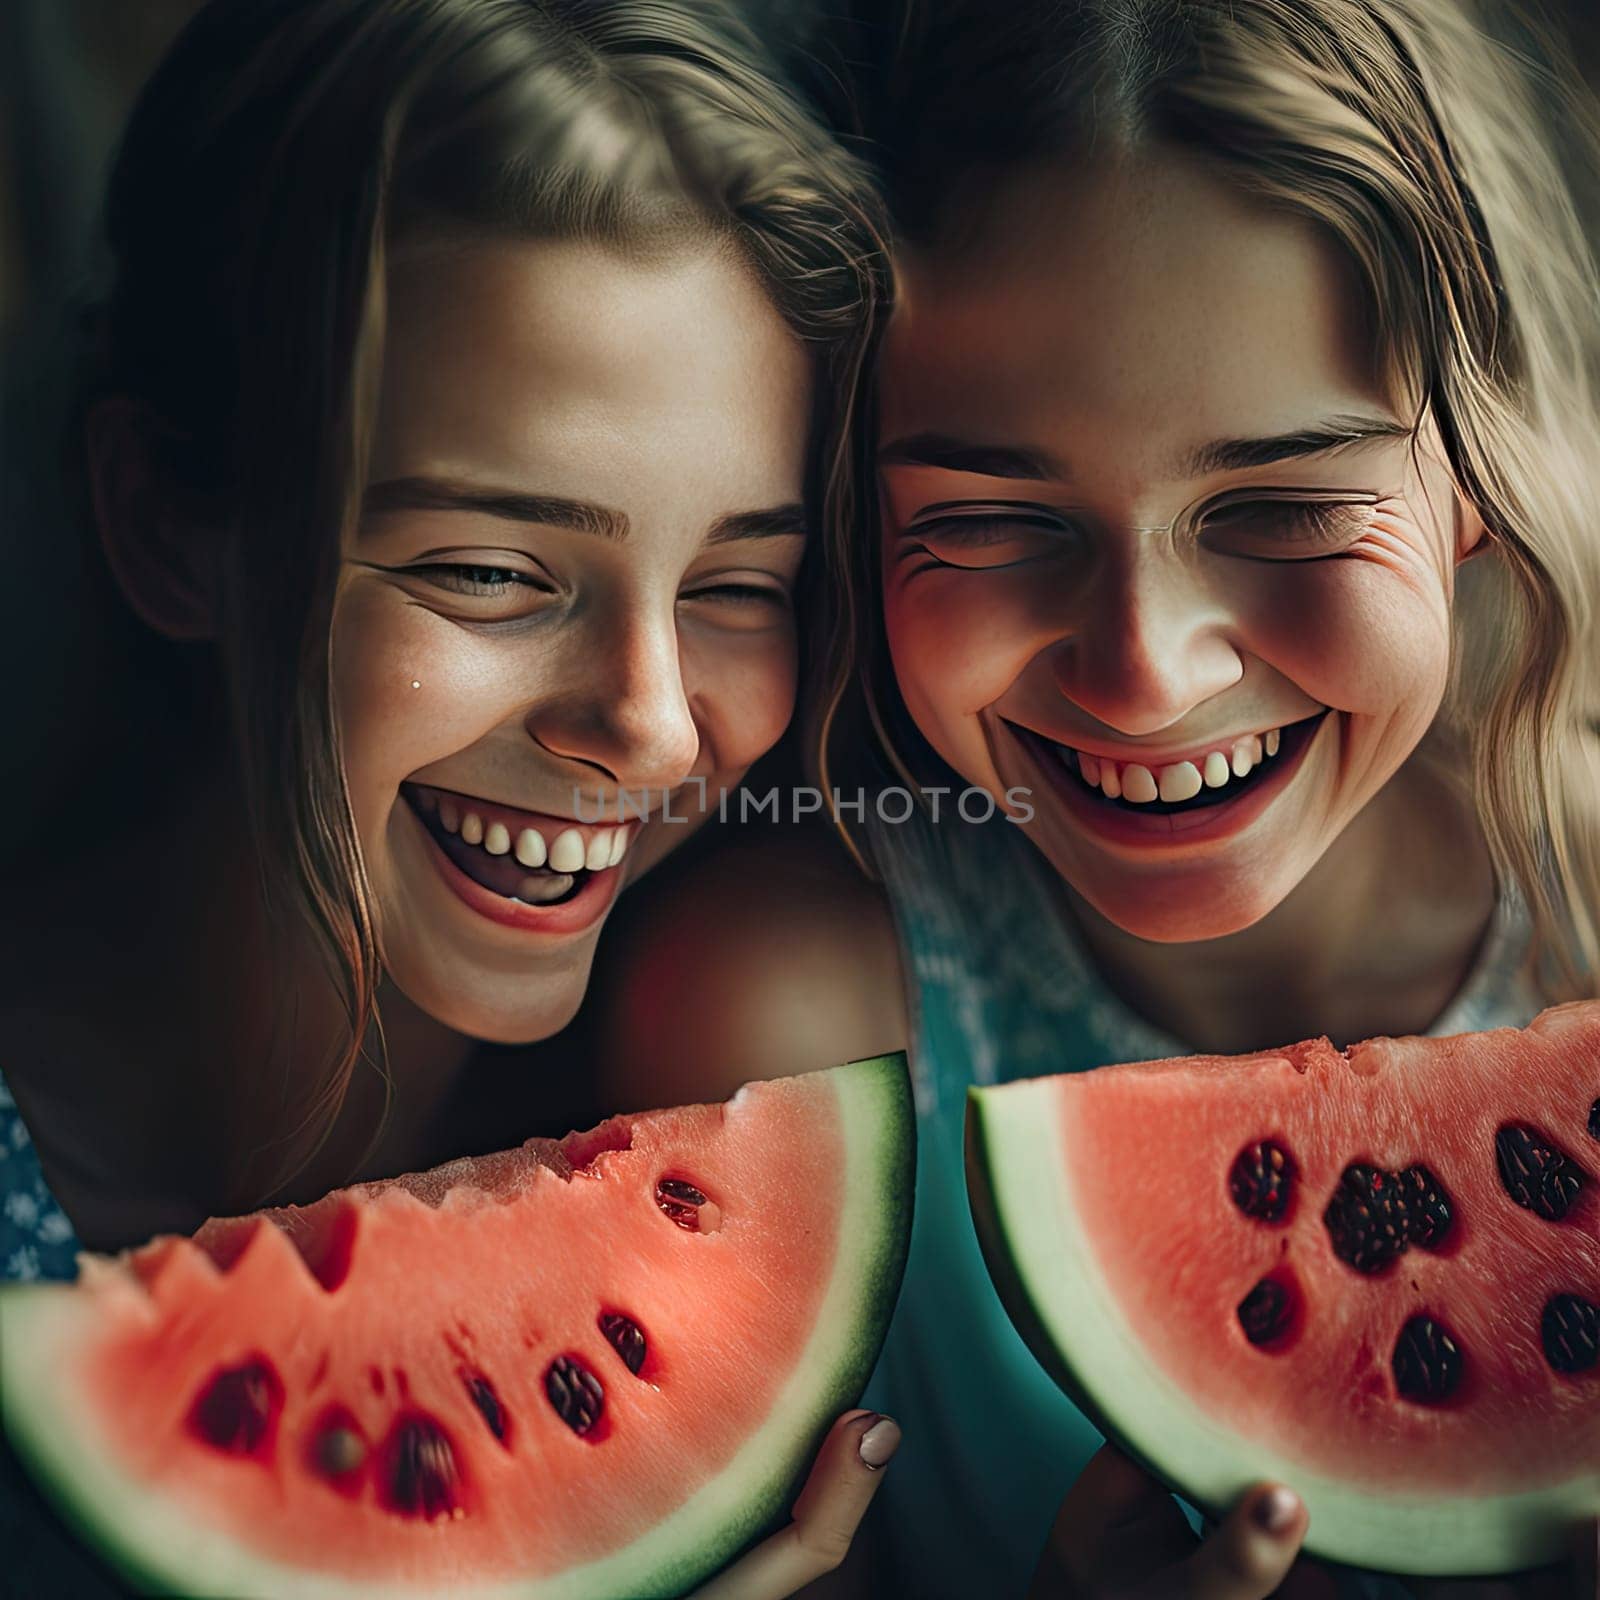 lose up portrait of two young girls enjoying a watermelon. Female friends eating a watermelon slice and laughing together.